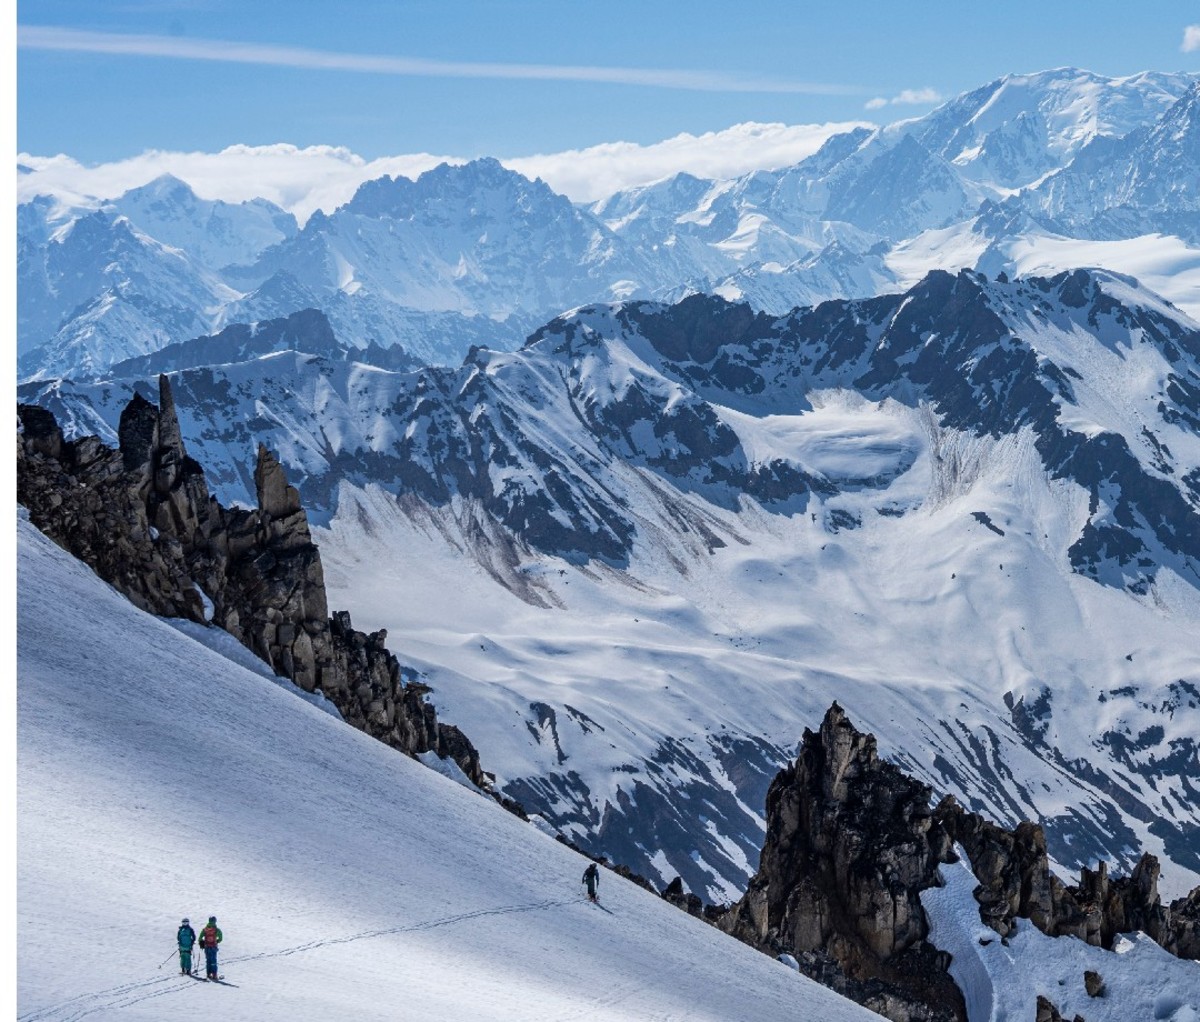 Heli-skiers stand on an upper slope overlooking a giant Alaskan mountain panorama